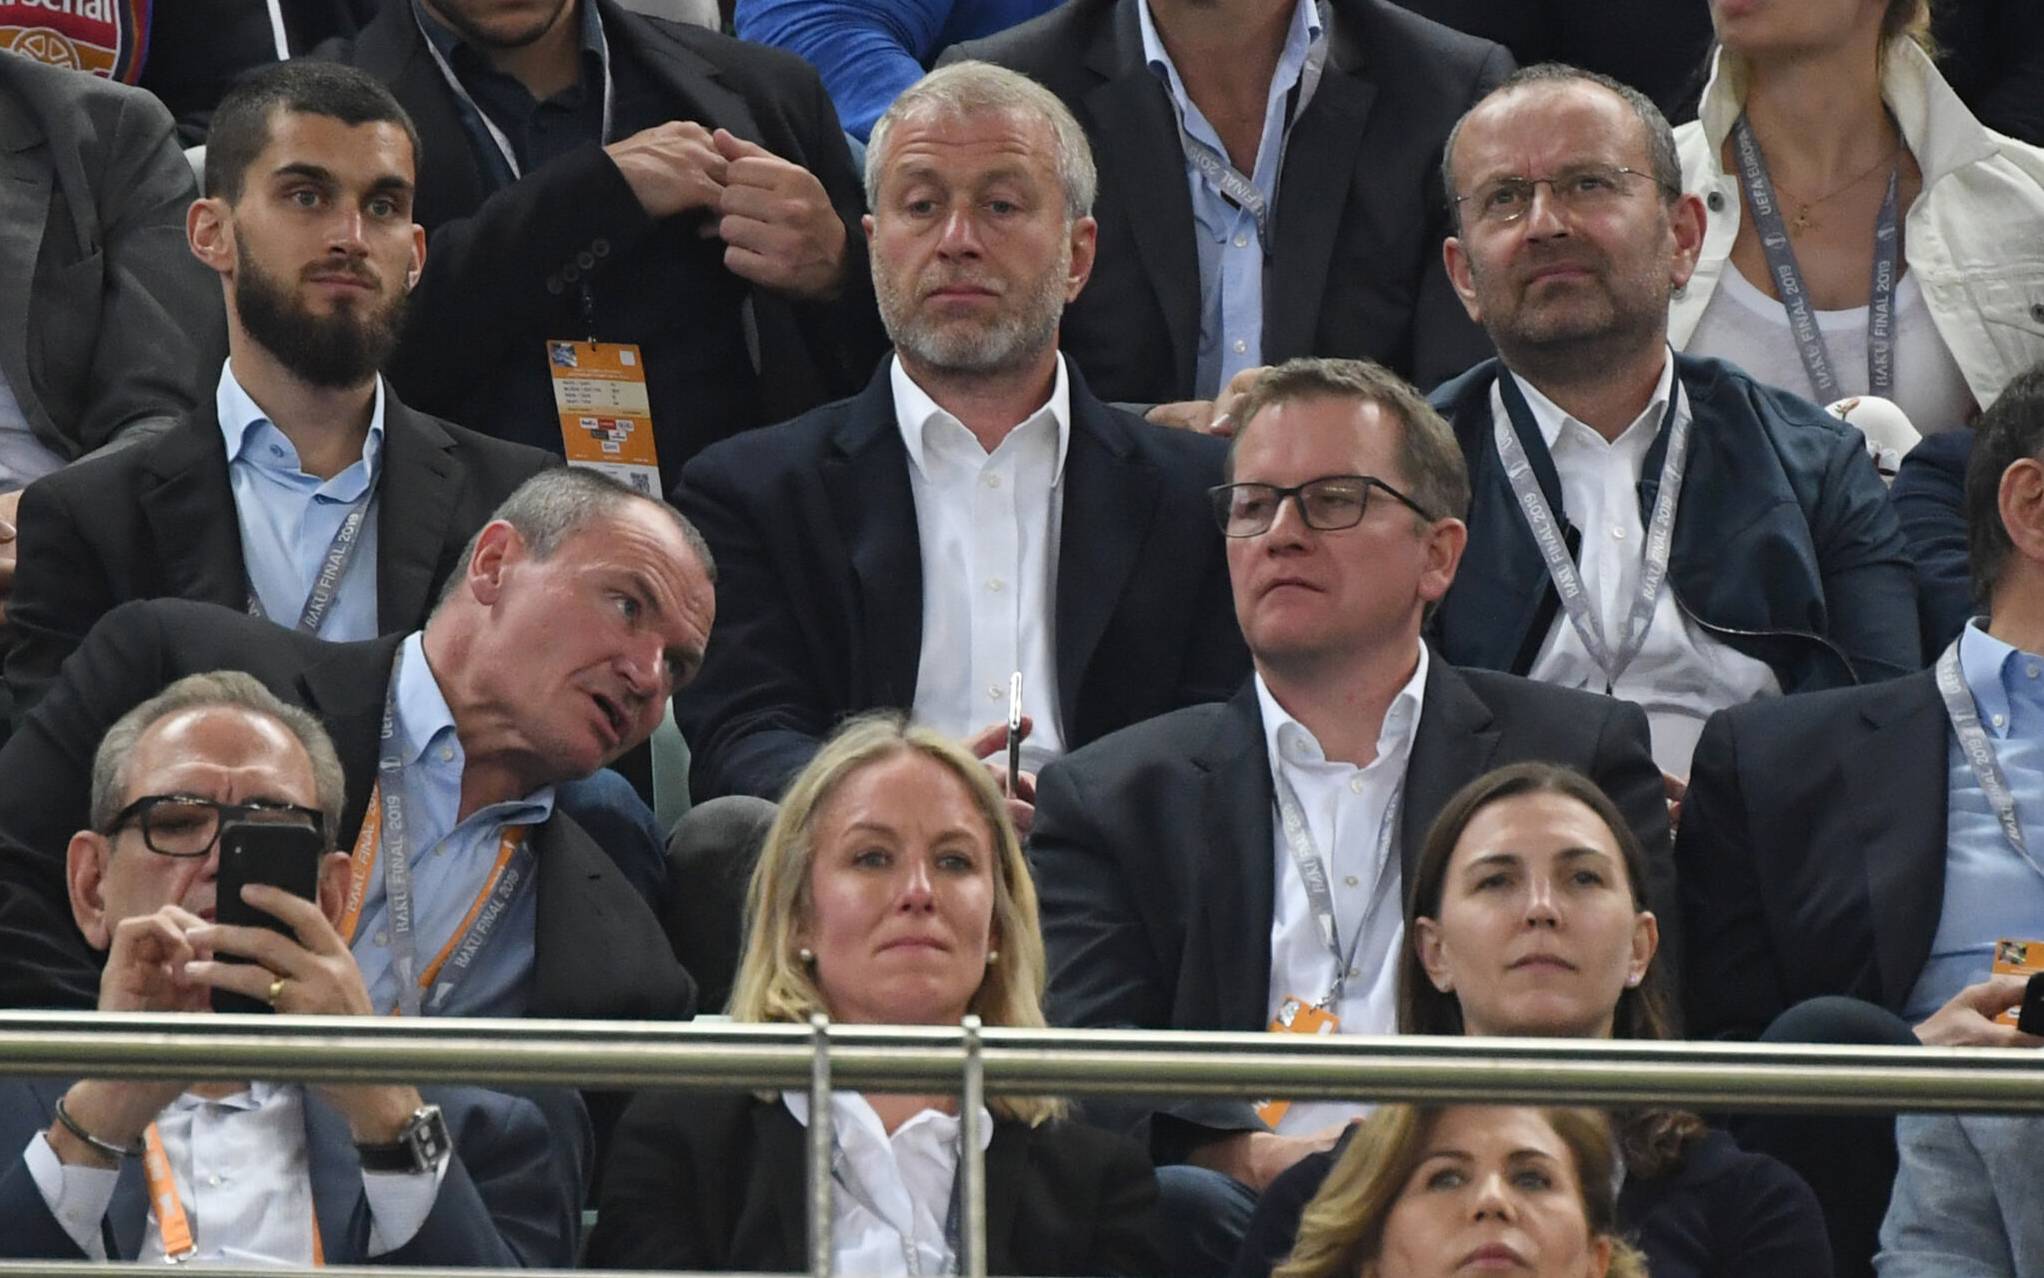 Chelsea's Russian owner Roman Abramovich (C) attends the UEFA Europa League final football match between Chelsea FC and Arsenal FC at the Baku Olympic Stadium in Baku, Azerbaijian, on May 29, 2019. (Photo by Kirill KUDRYAVTSEV / AFP)